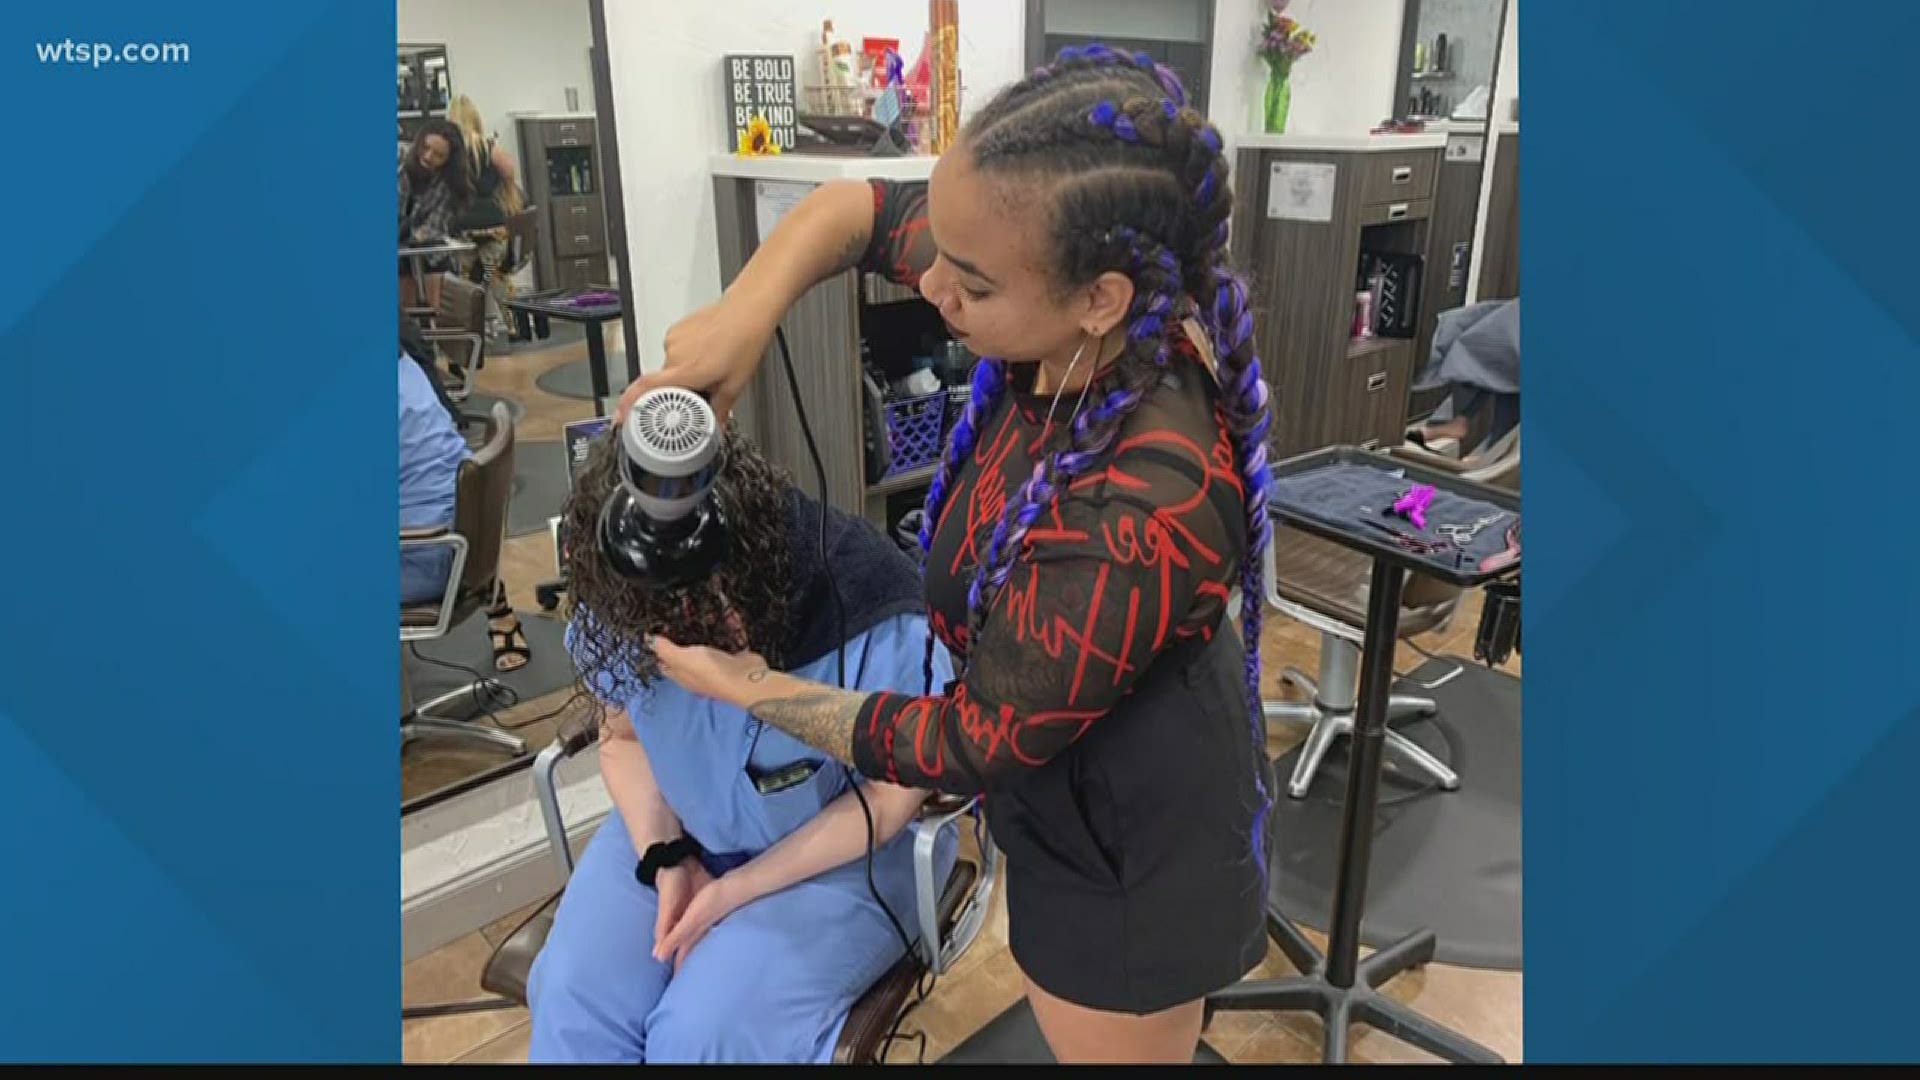 Florida Gov. Ron DeSantis said it's "not a matter of if, but when" salons and barbershops reopen.